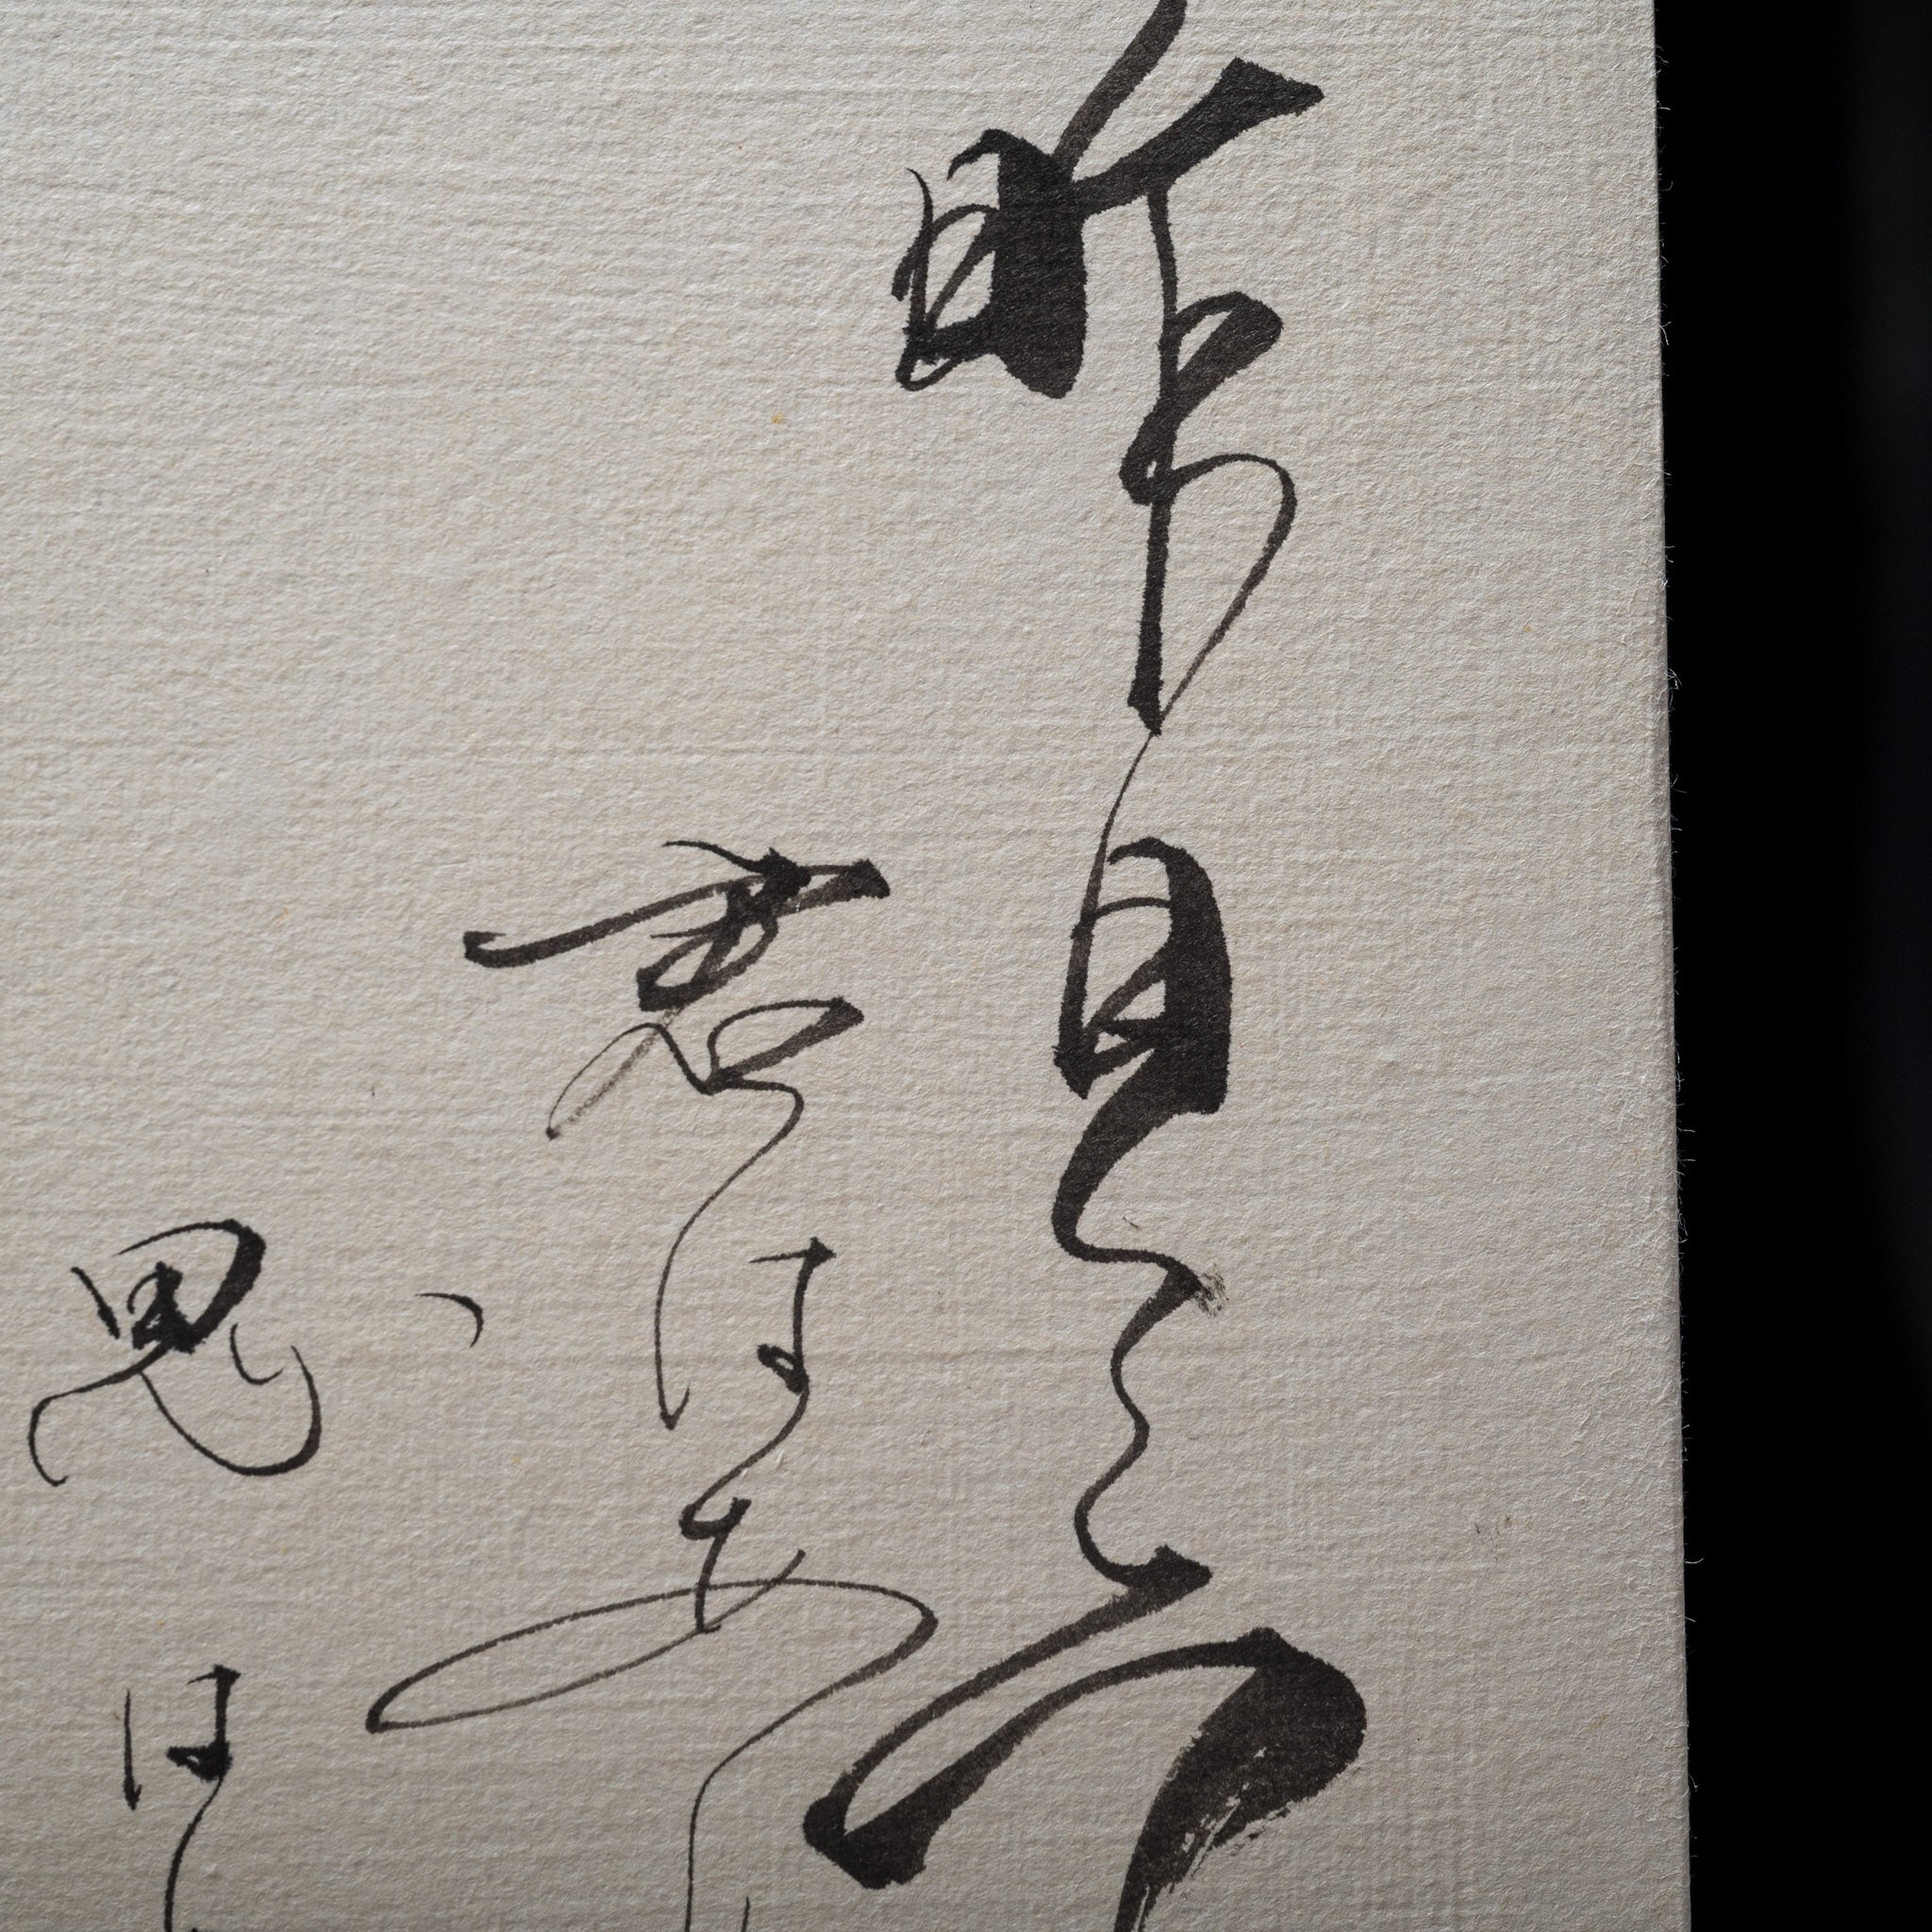 Japanese Calligraphy - Collection of Ten Thousand leaves "万葉集"